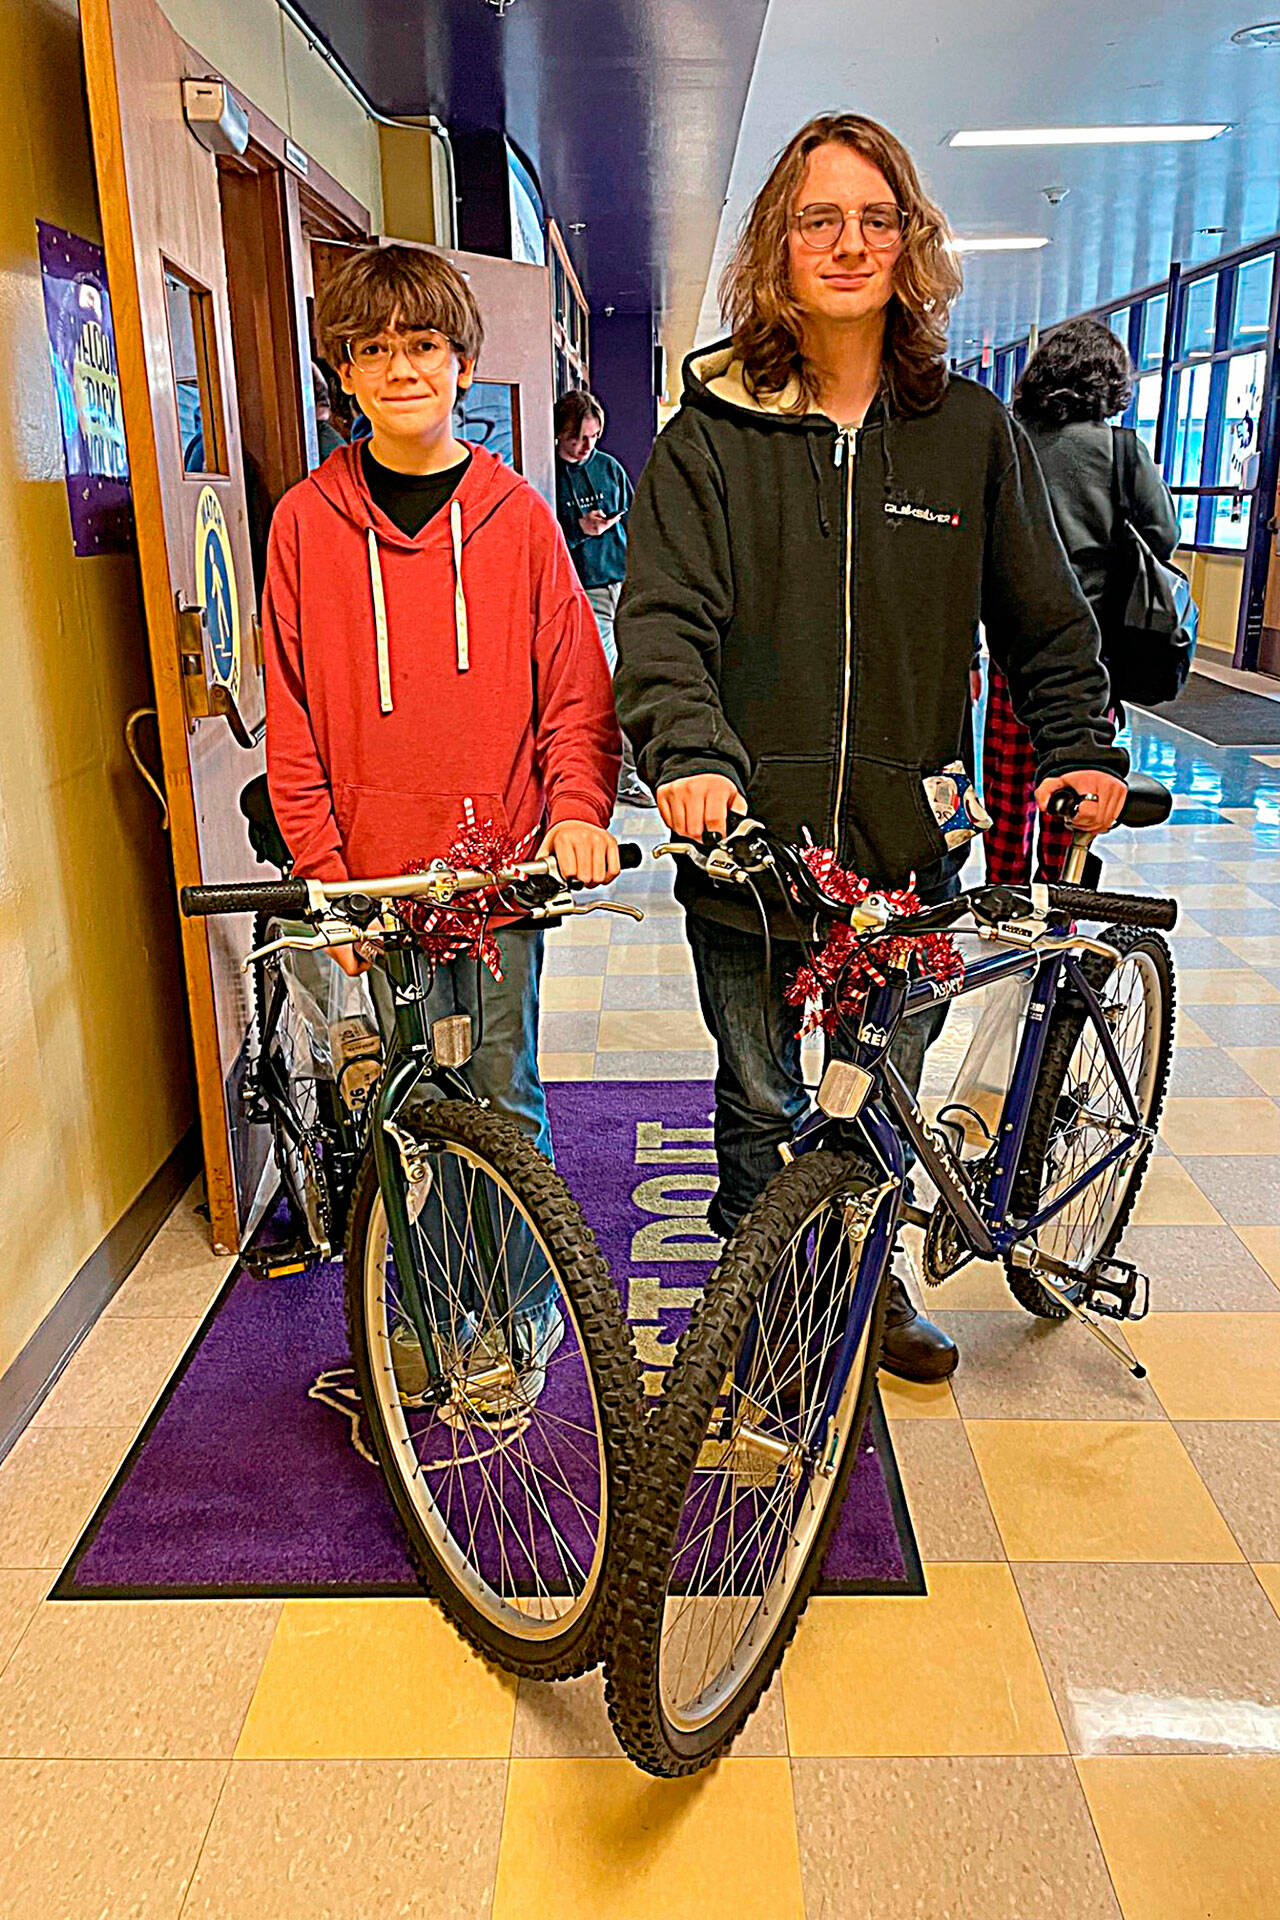 Sequim freshmen Nathan Mavy, left, and Kaydan Scouller were surprised to learn they were recipients of bicycles at Sequim High School’s Winter Wishes on Dec. 18. They both assumed a friend asked on their behalf. “I’m very confused and happy,” Mavy said. Both teens said they appreciated it a lot with Mavy saying his previous bike was stolen.